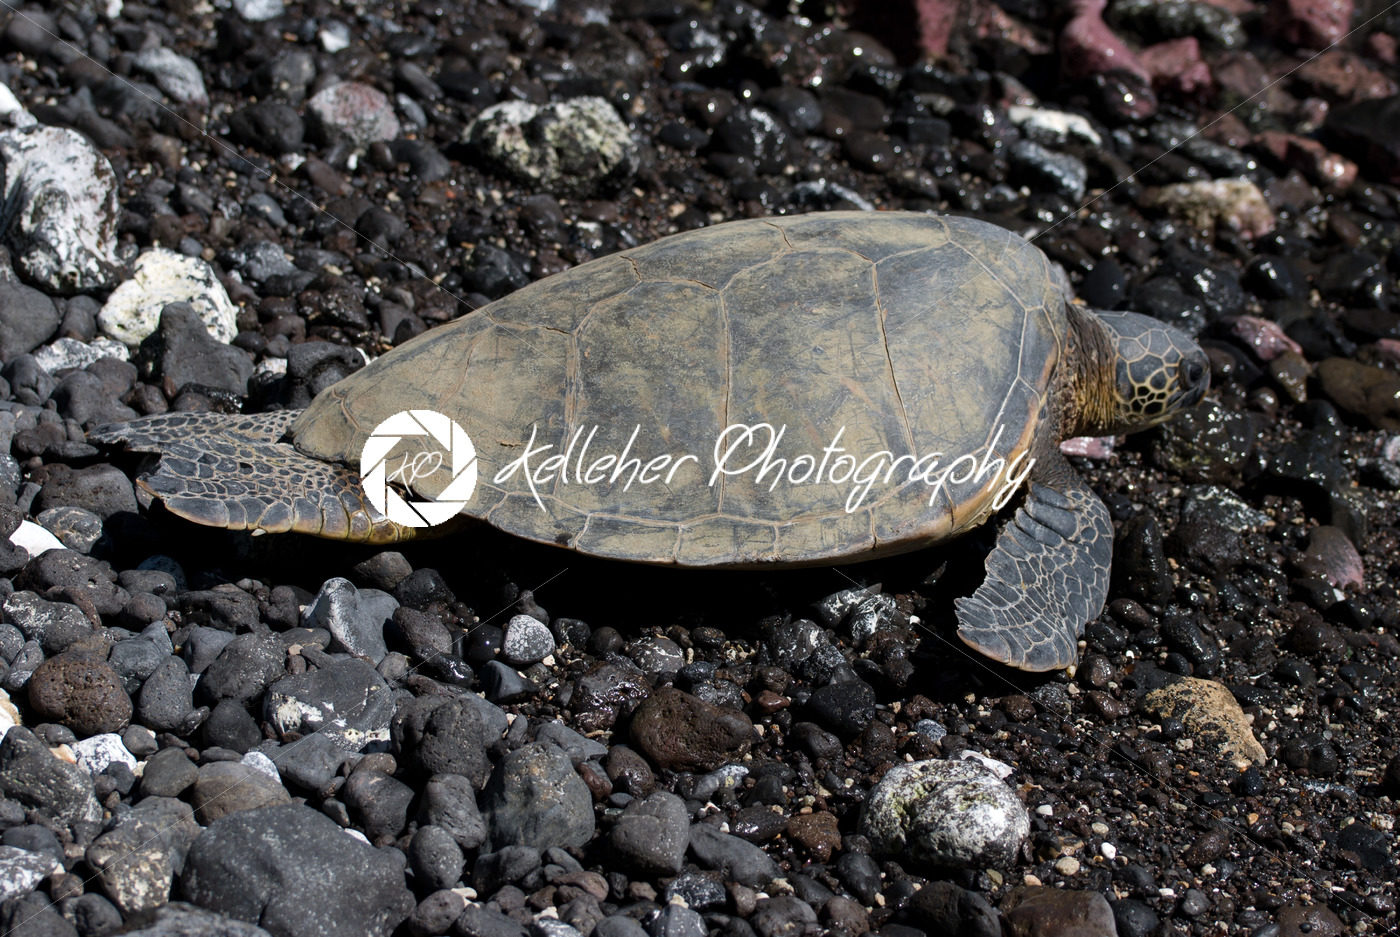 Close up of sea turtles resting on a rocky sand beach in Maui Hawaii - Kelleher Photography Store